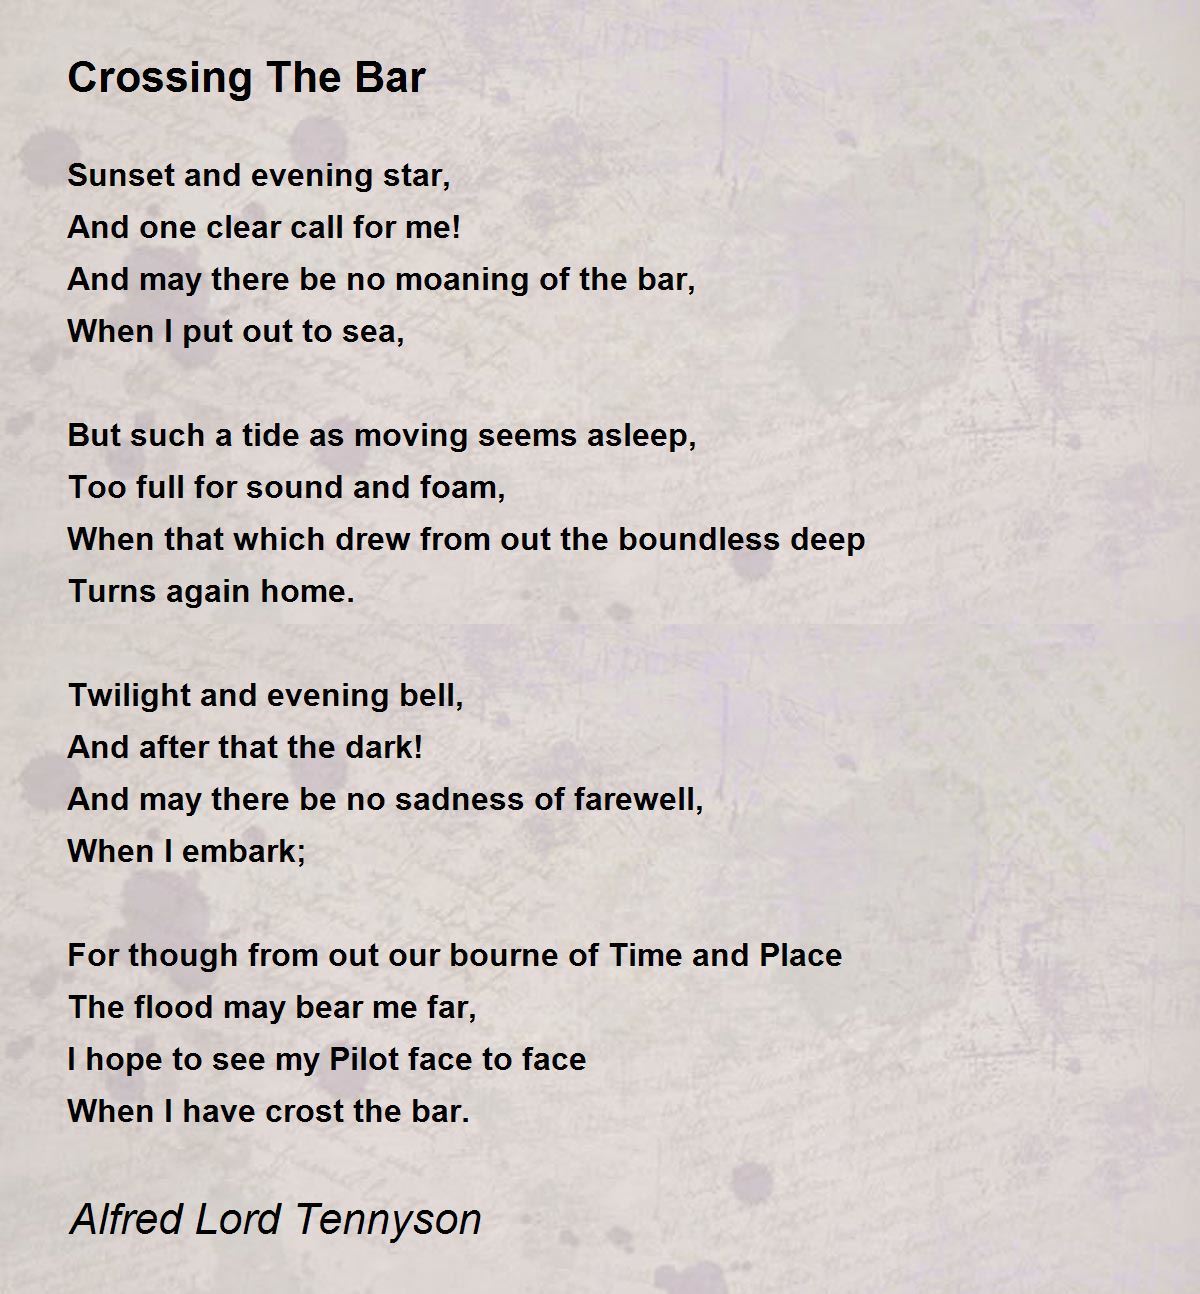 Crossing The Bar by Alfred Lord Tennyson - Crossing The Bar Poem